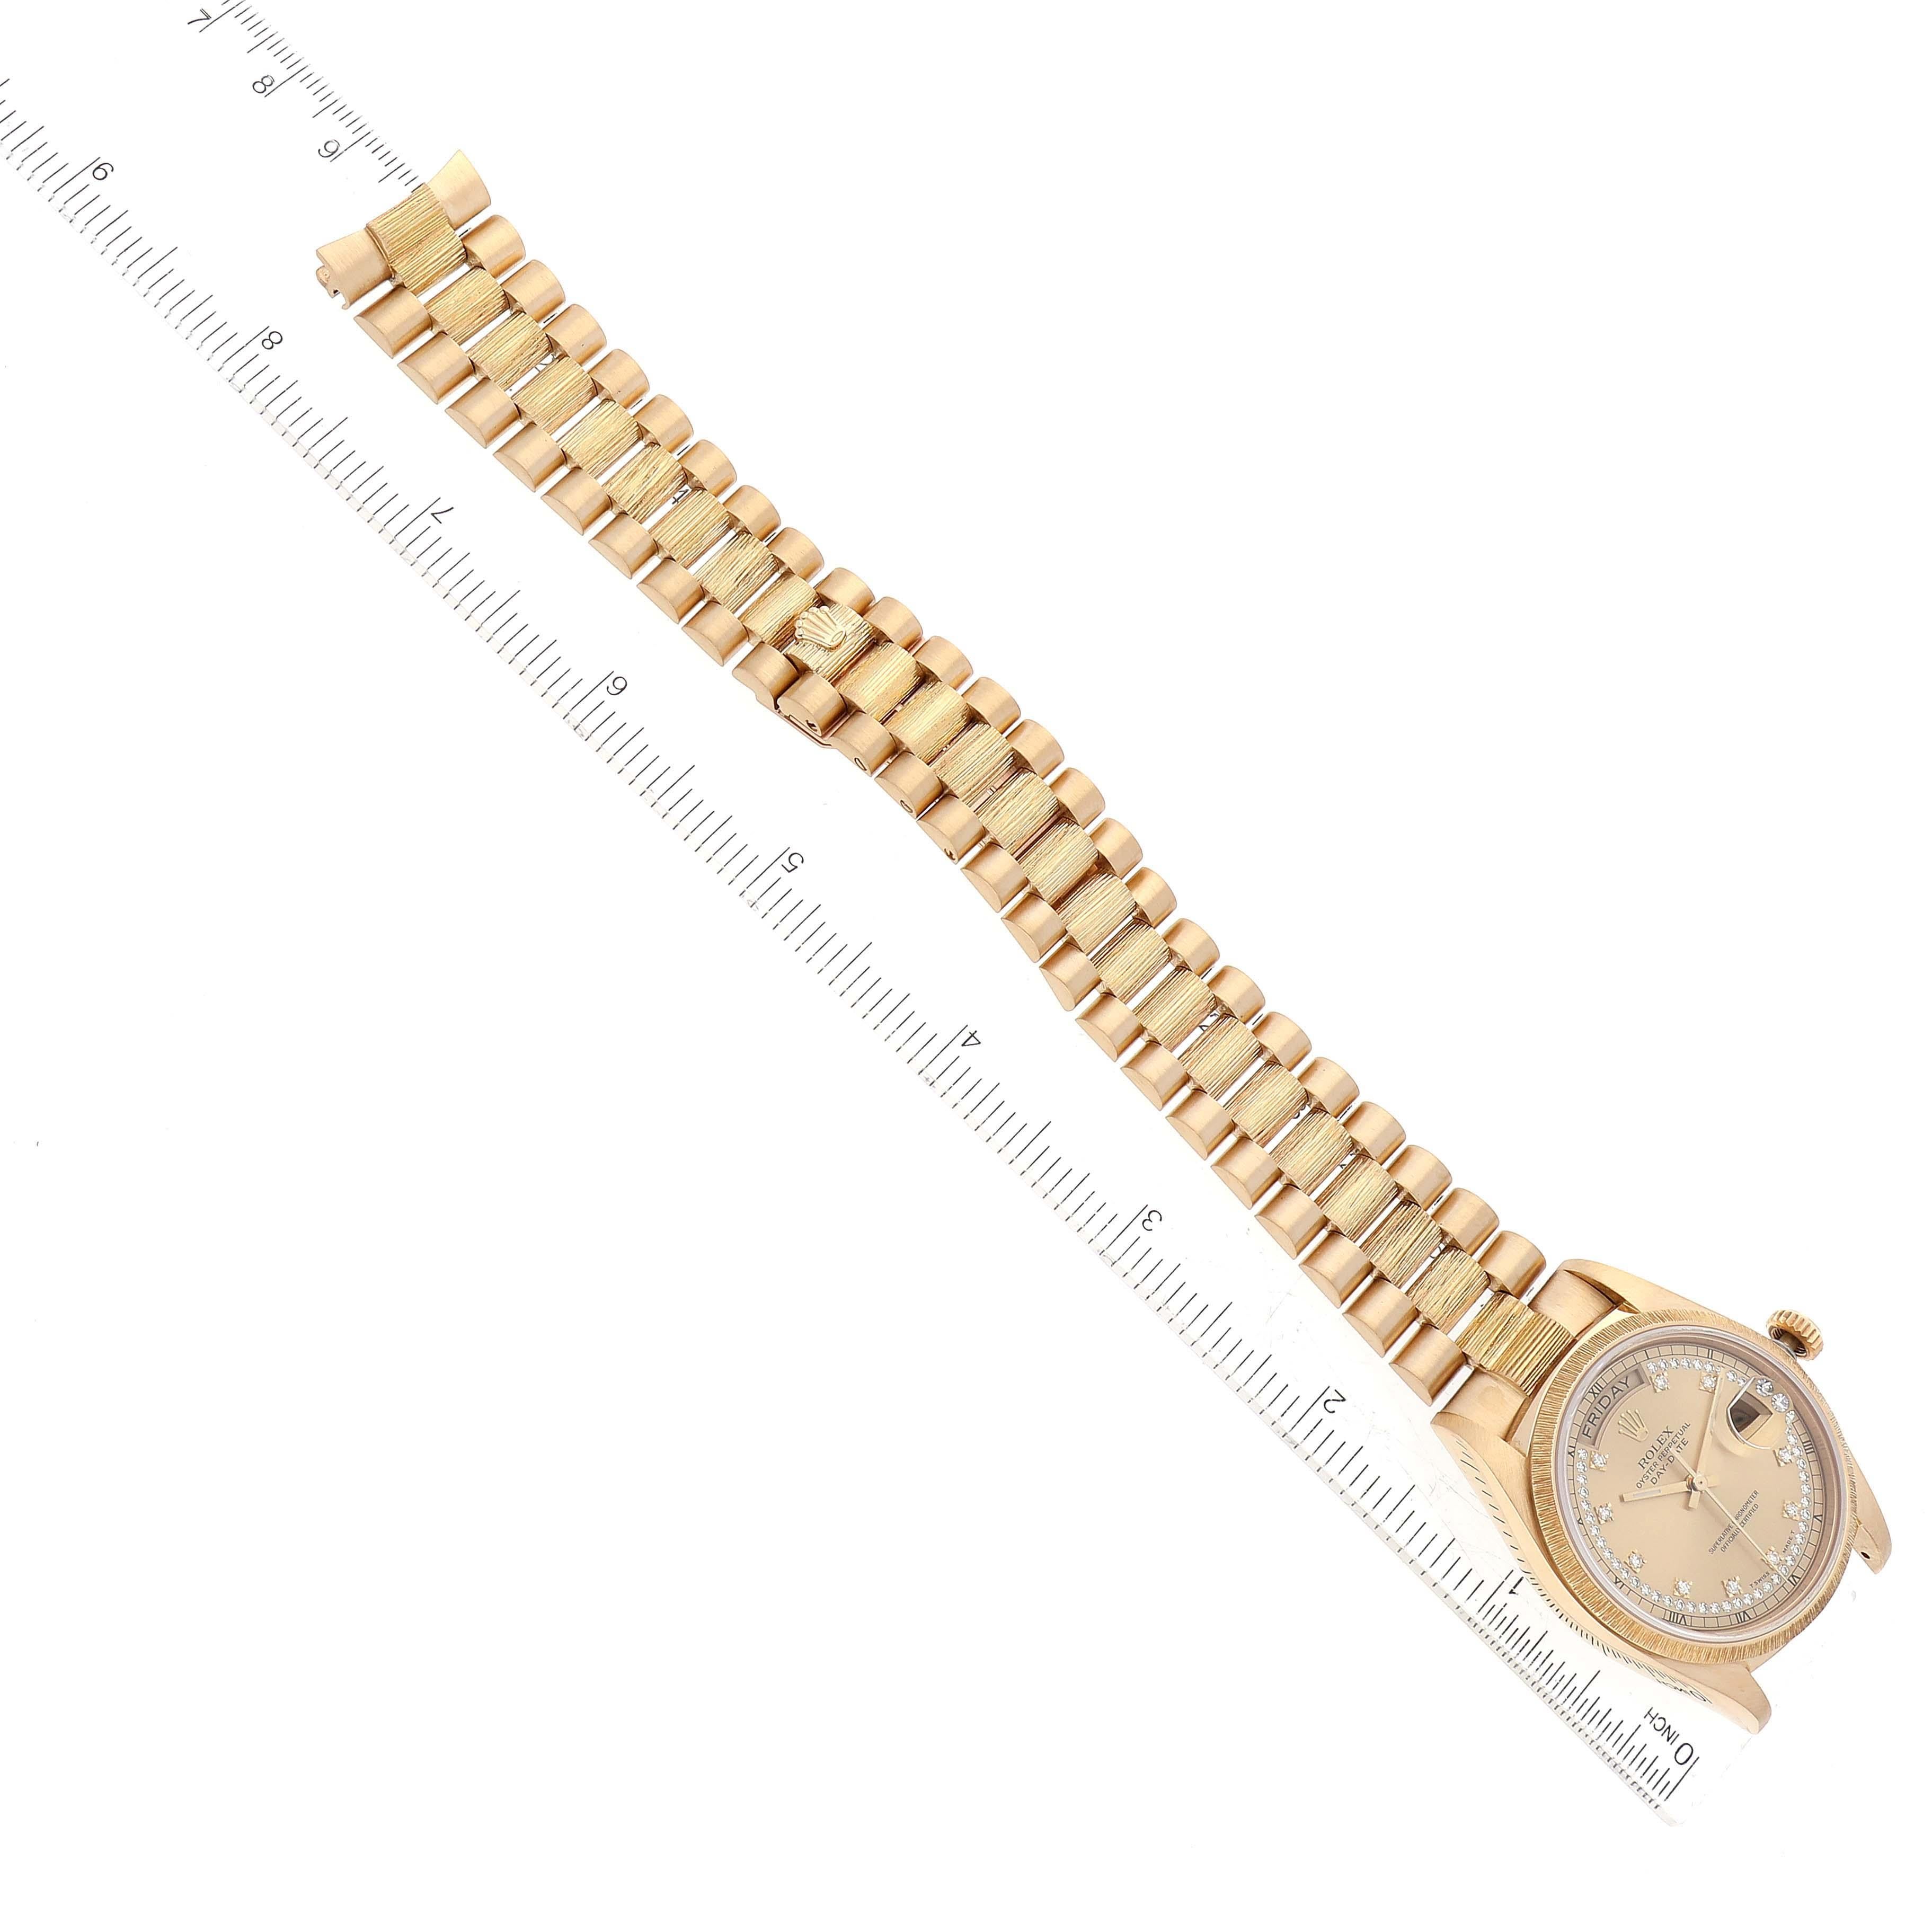 Rolex President Day-Date Diamond Dial Yellow Gold Bark Finish Mens Watch 18078 For Sale 6